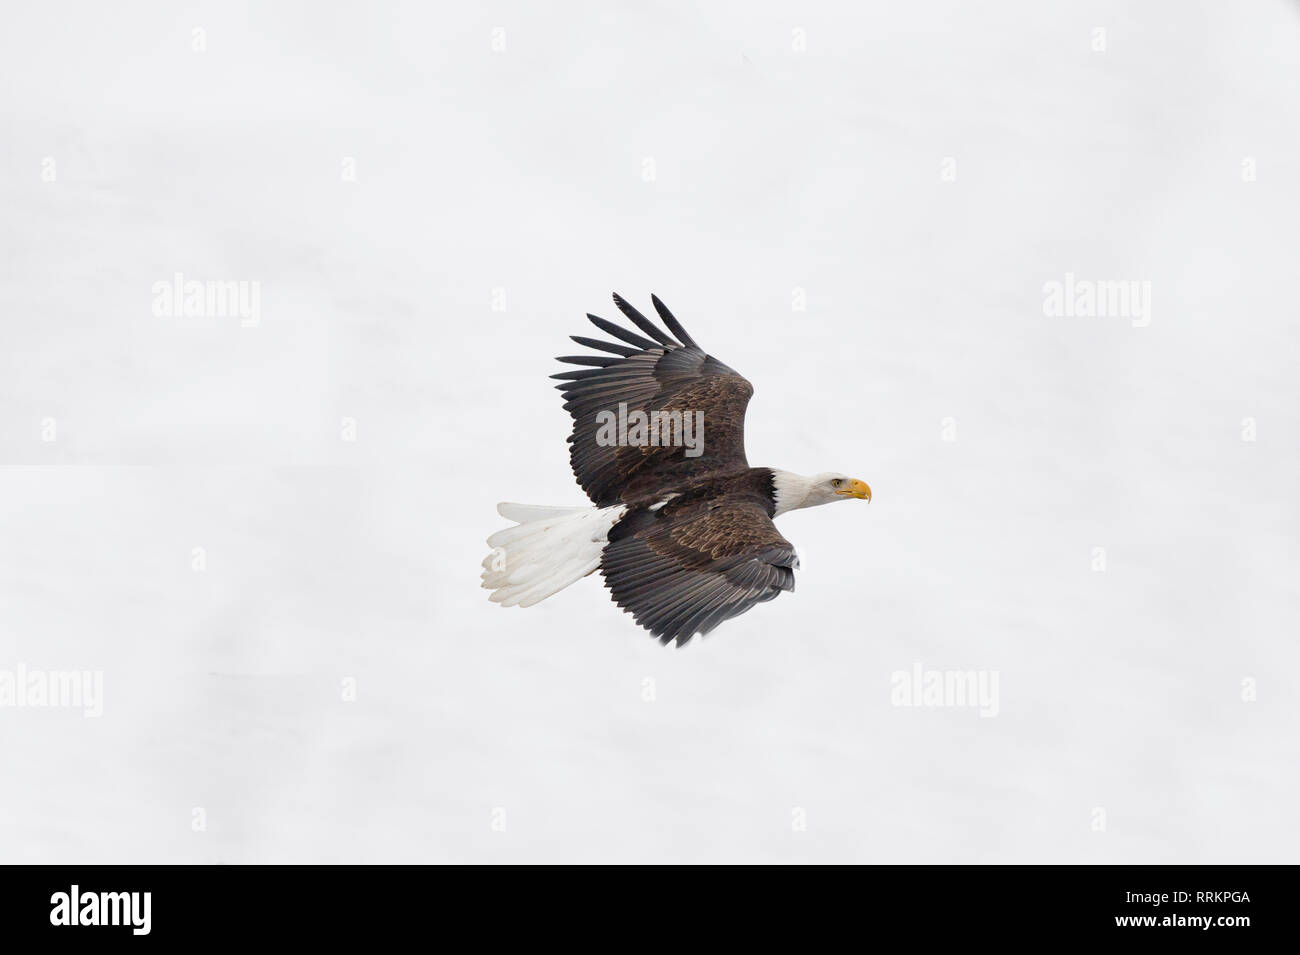 Adult bald eagle flying over the Chilkat River near Haines Alaska Stock Photo